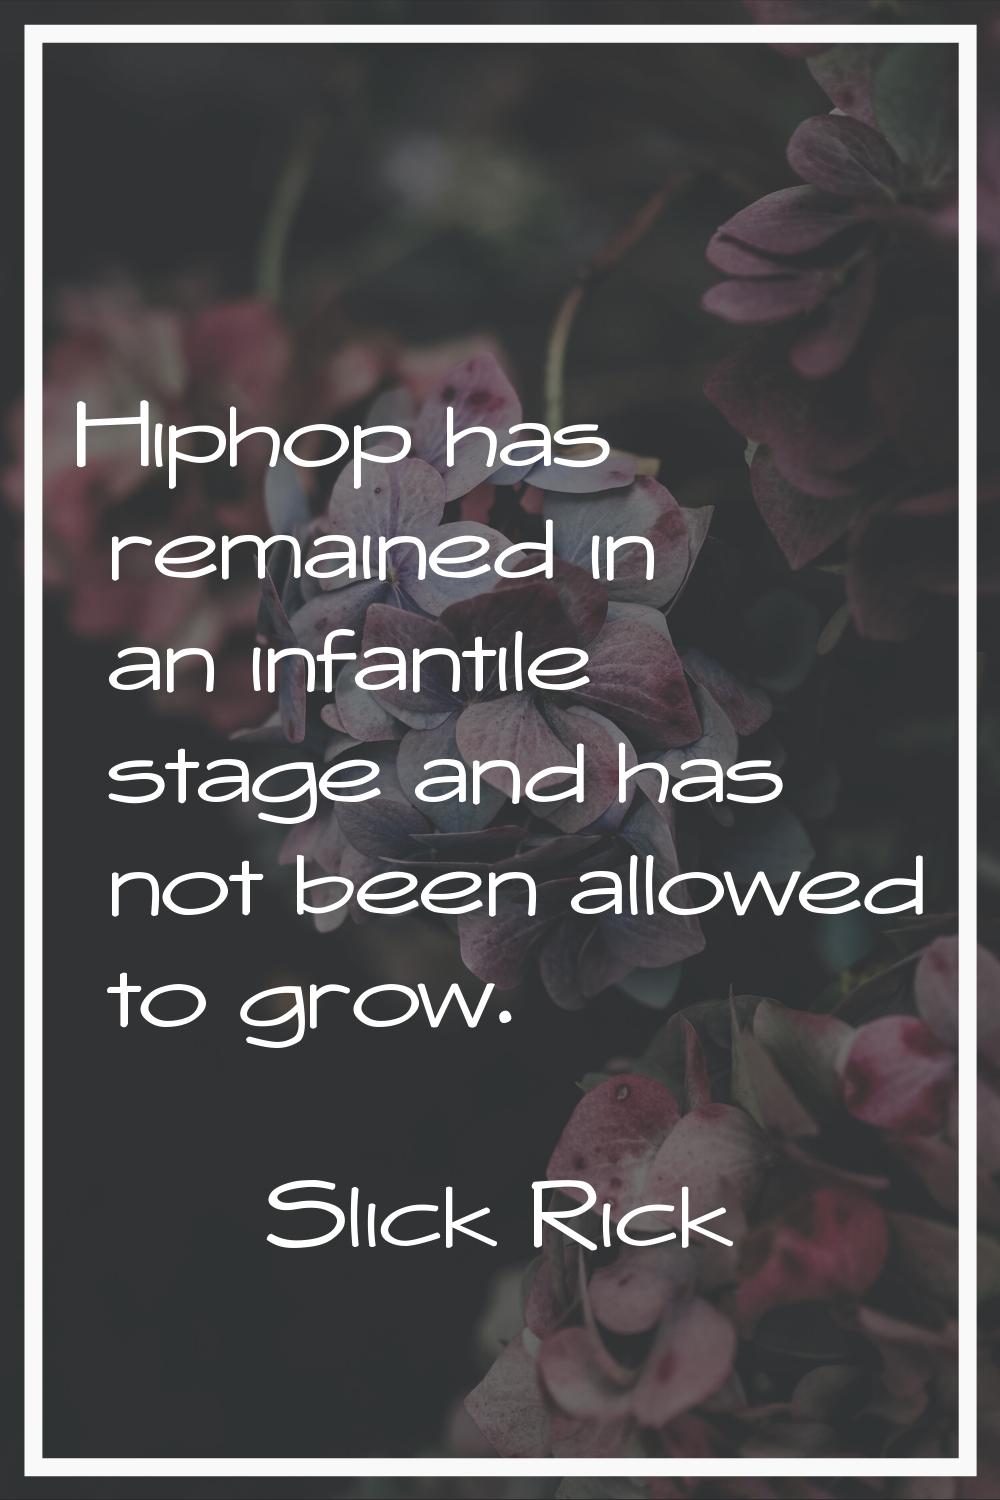 Hiphop has remained in an infantile stage and has not been allowed to grow.